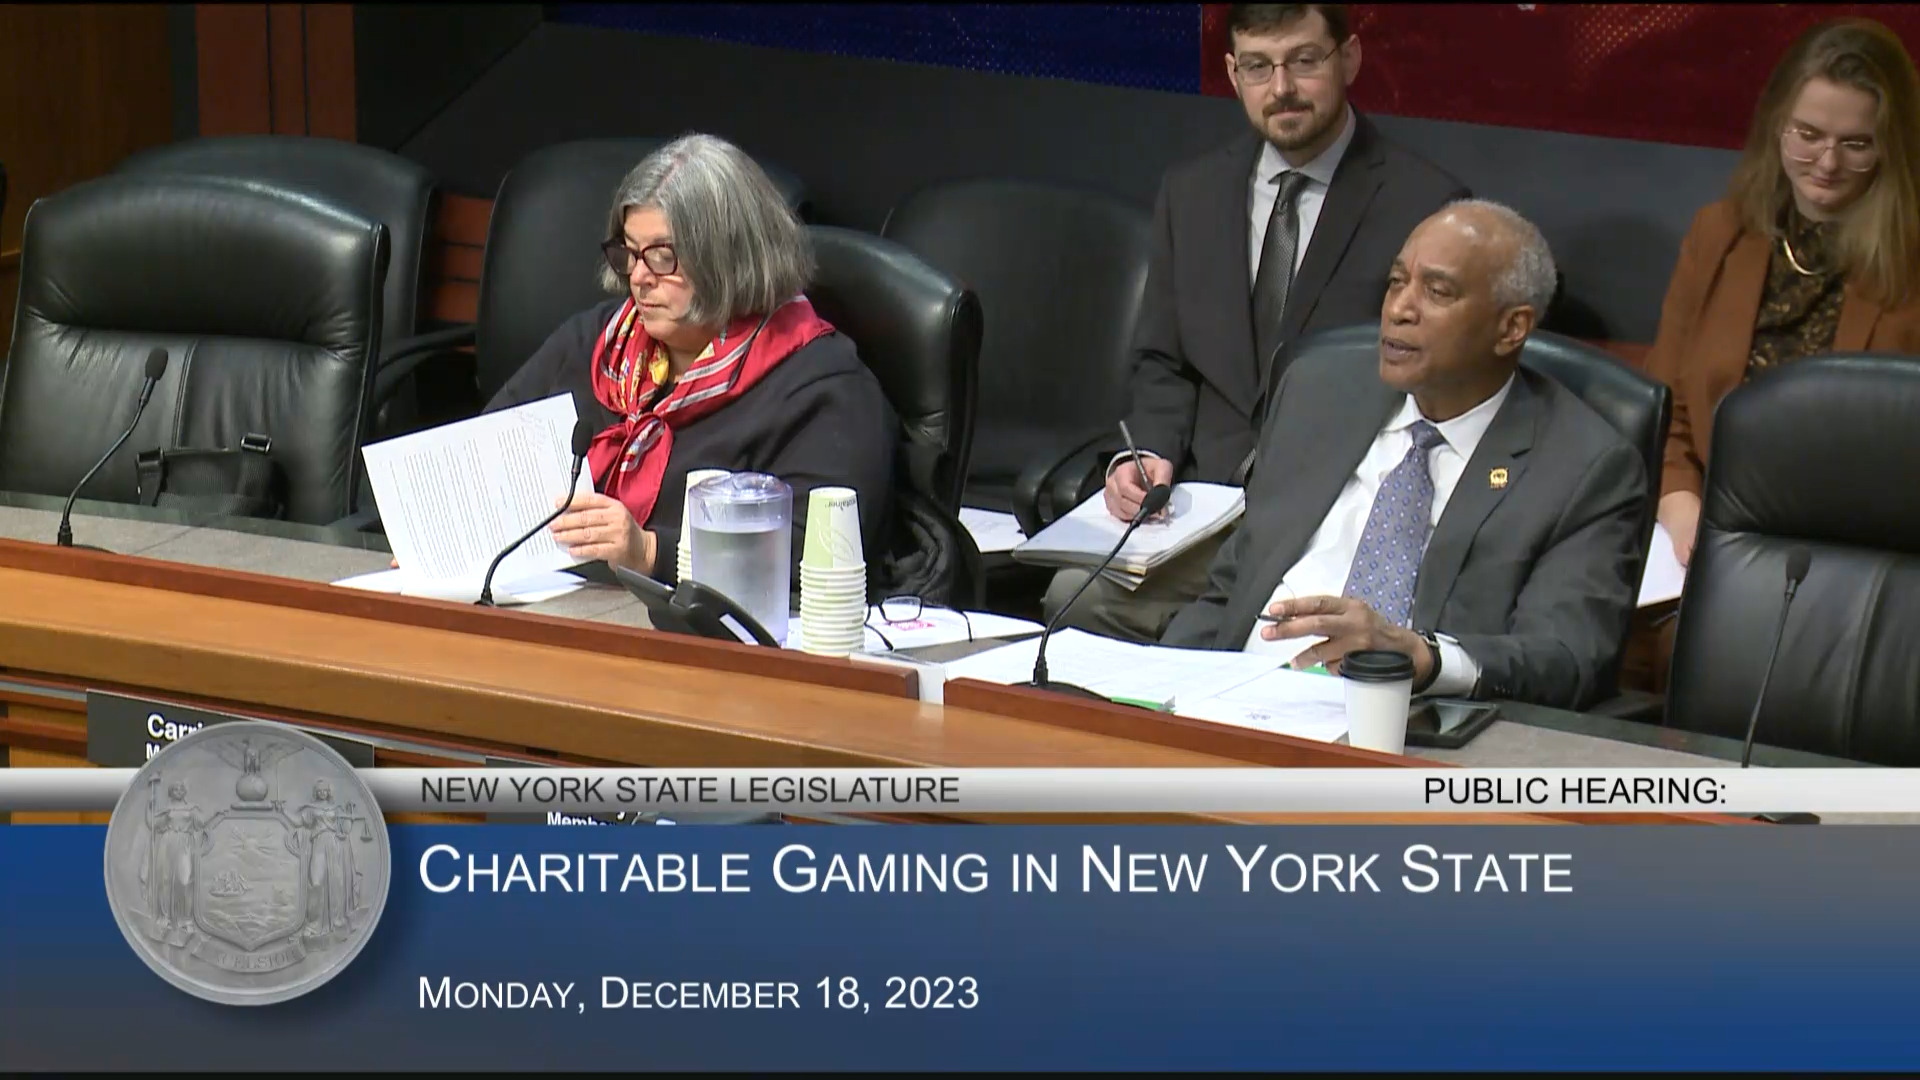 Pretlow Chairs a Public Hearing on Charitable Gaming